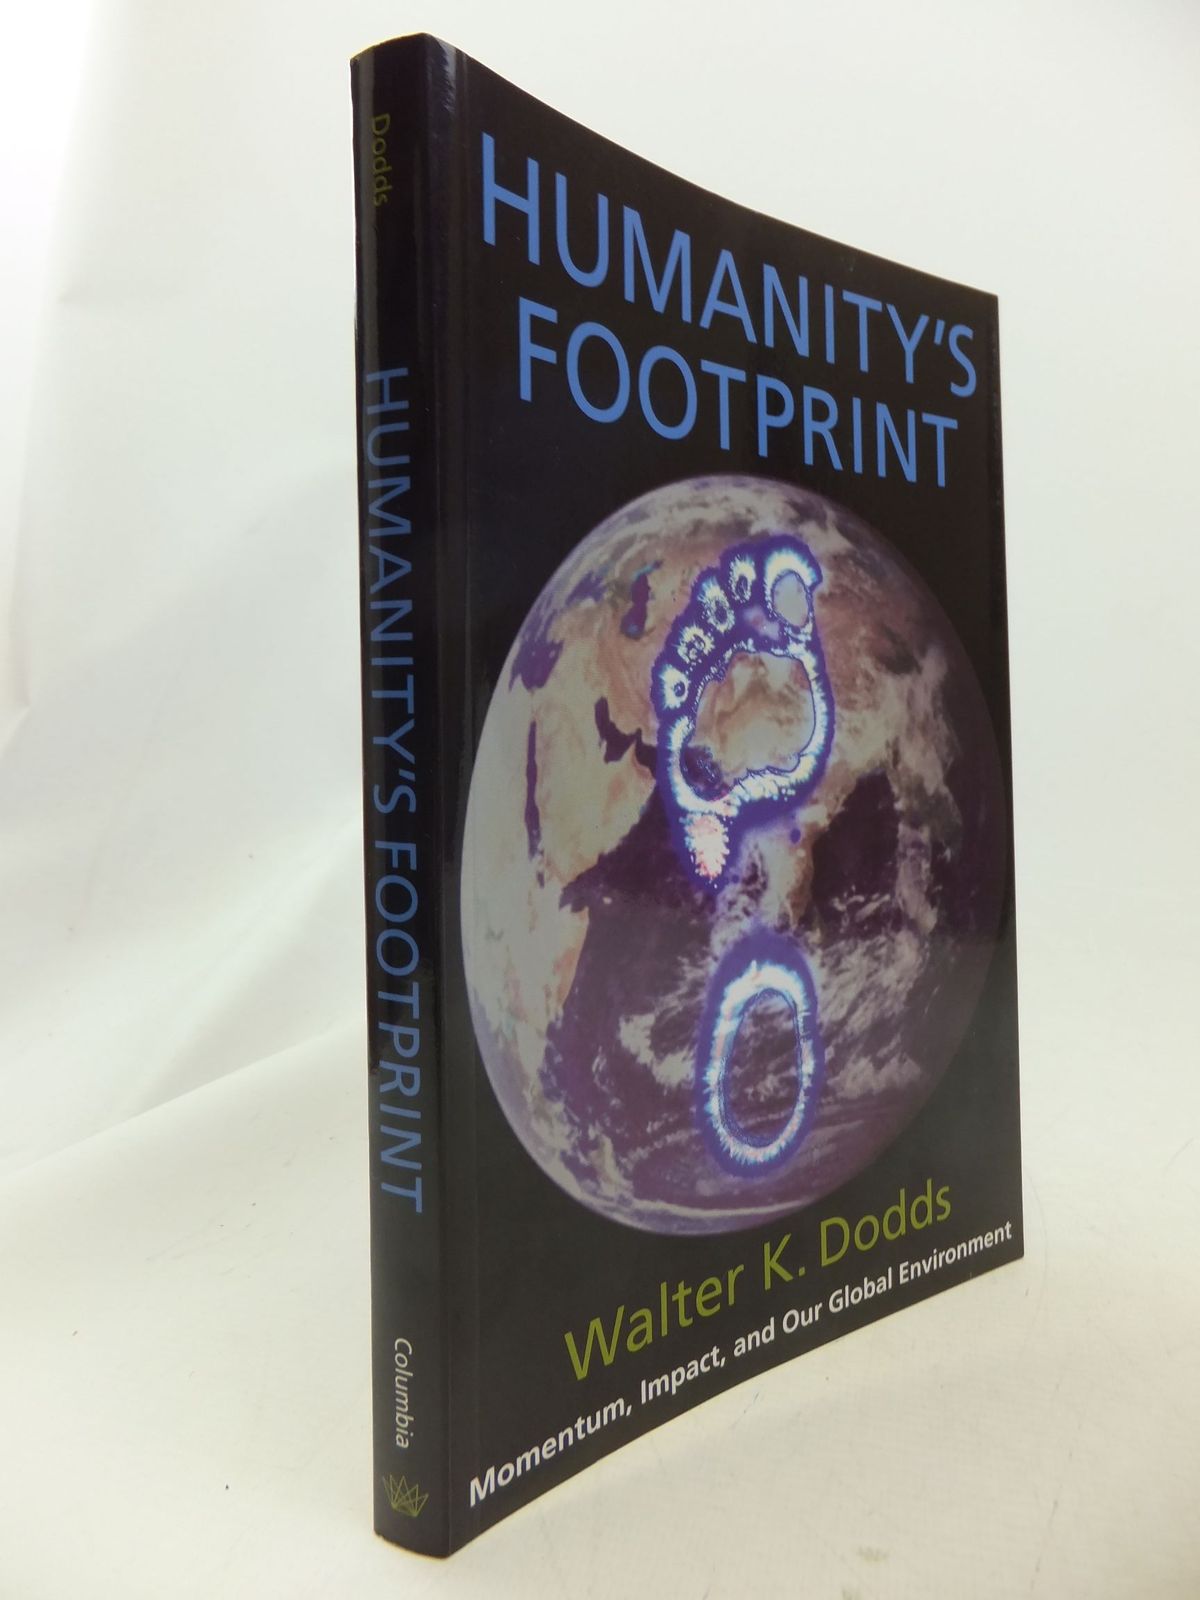 Photo of HUMANITY'S FOOTPRINT MOMENTUM, IMPACT, AND OUR GLOBAL ENVIROMENT written by Dodds, Walter K. published by Columbia University Press (STOCK CODE: 1710819)  for sale by Stella & Rose's Books